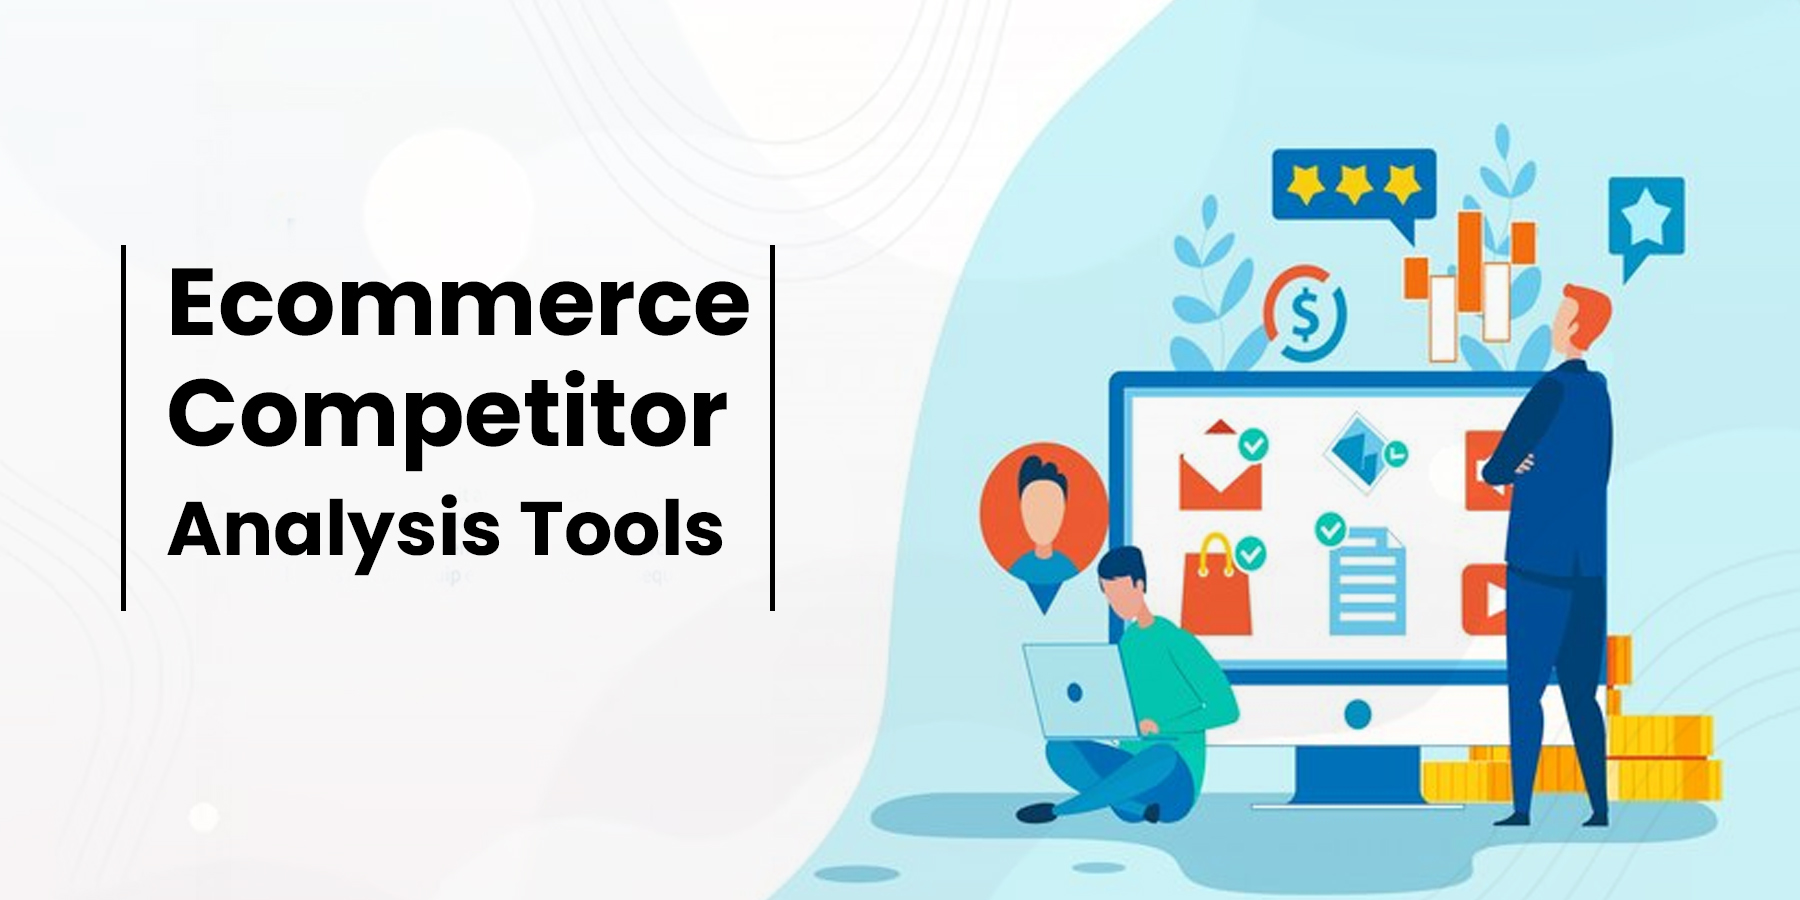 Ecommerce Competitor Analysis Tools